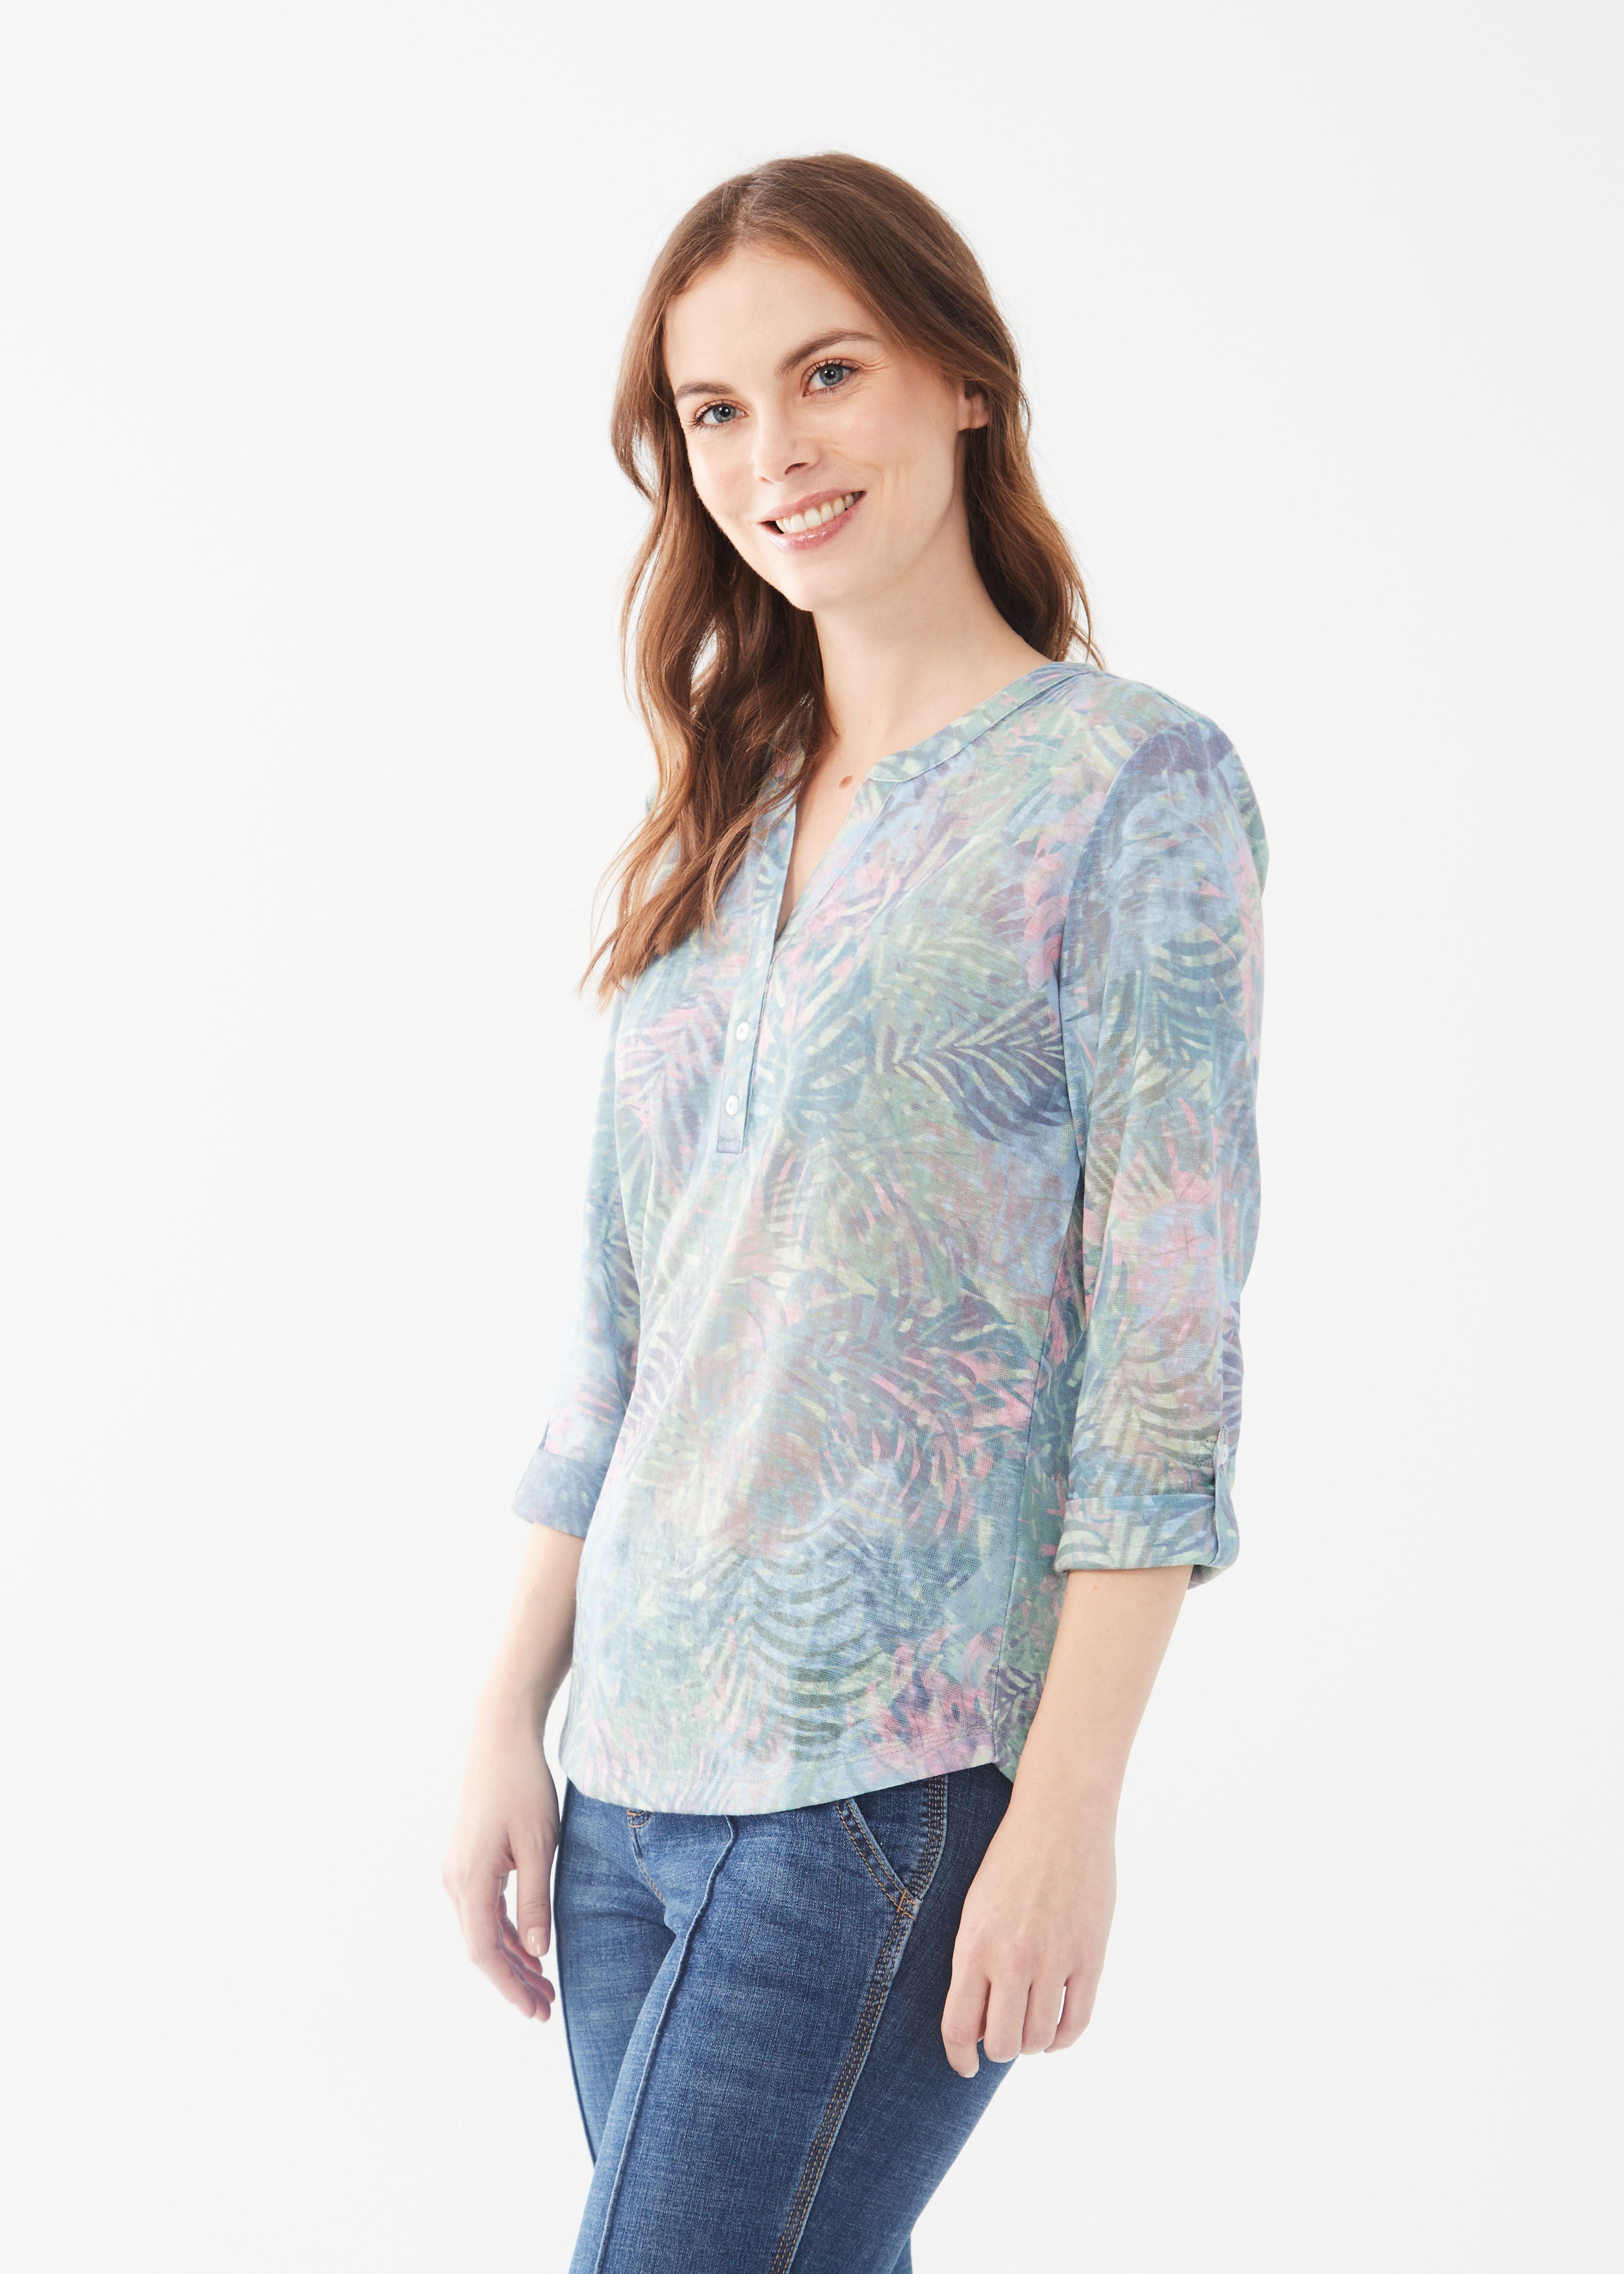 Unleash your adventurous side with our FDJ 3/4 Sleeve Tab Up Henley Top in Tropical Camo print.